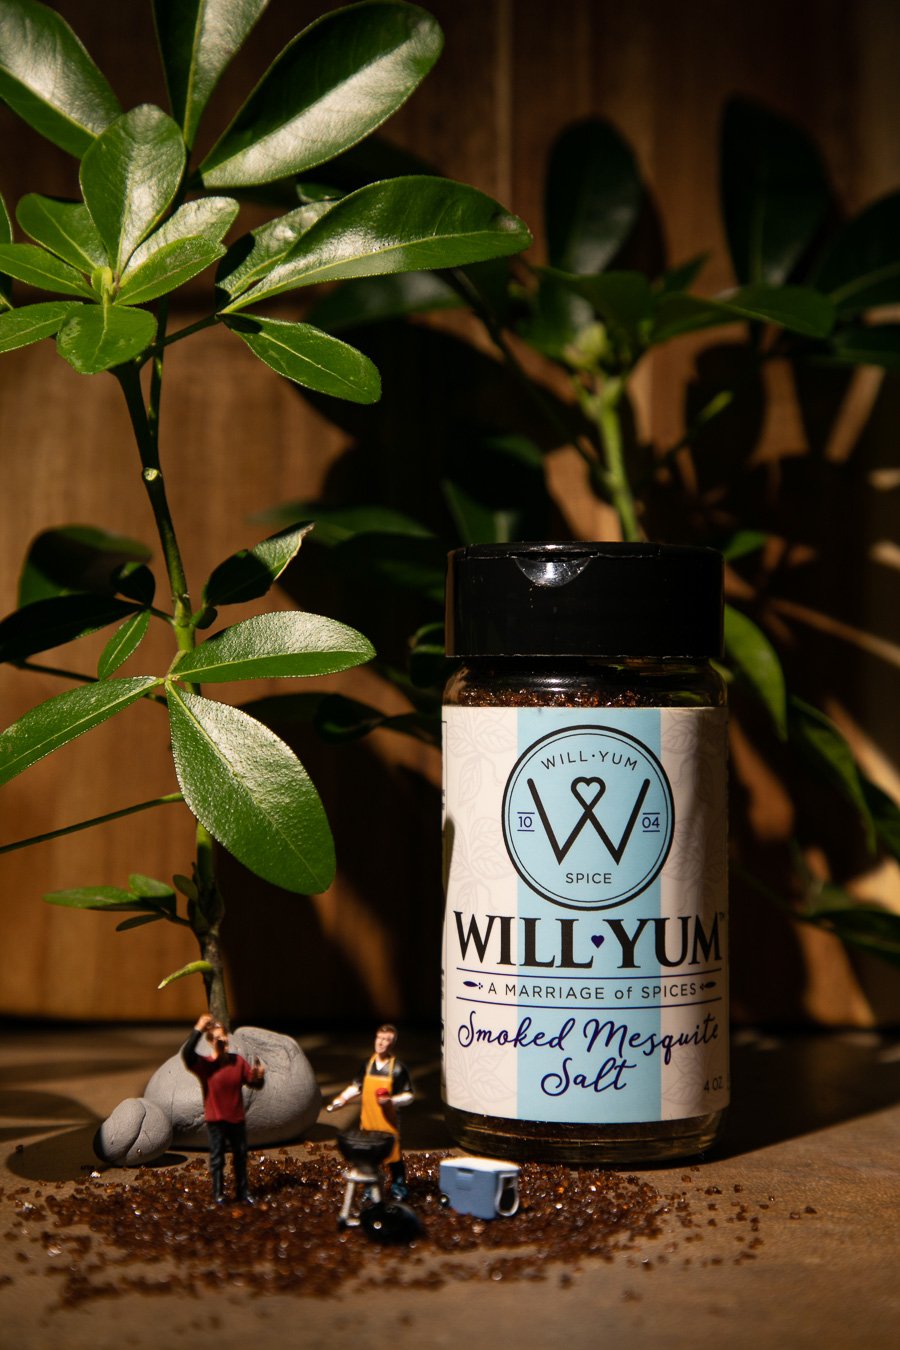 WillYUM Spice Mini Collection